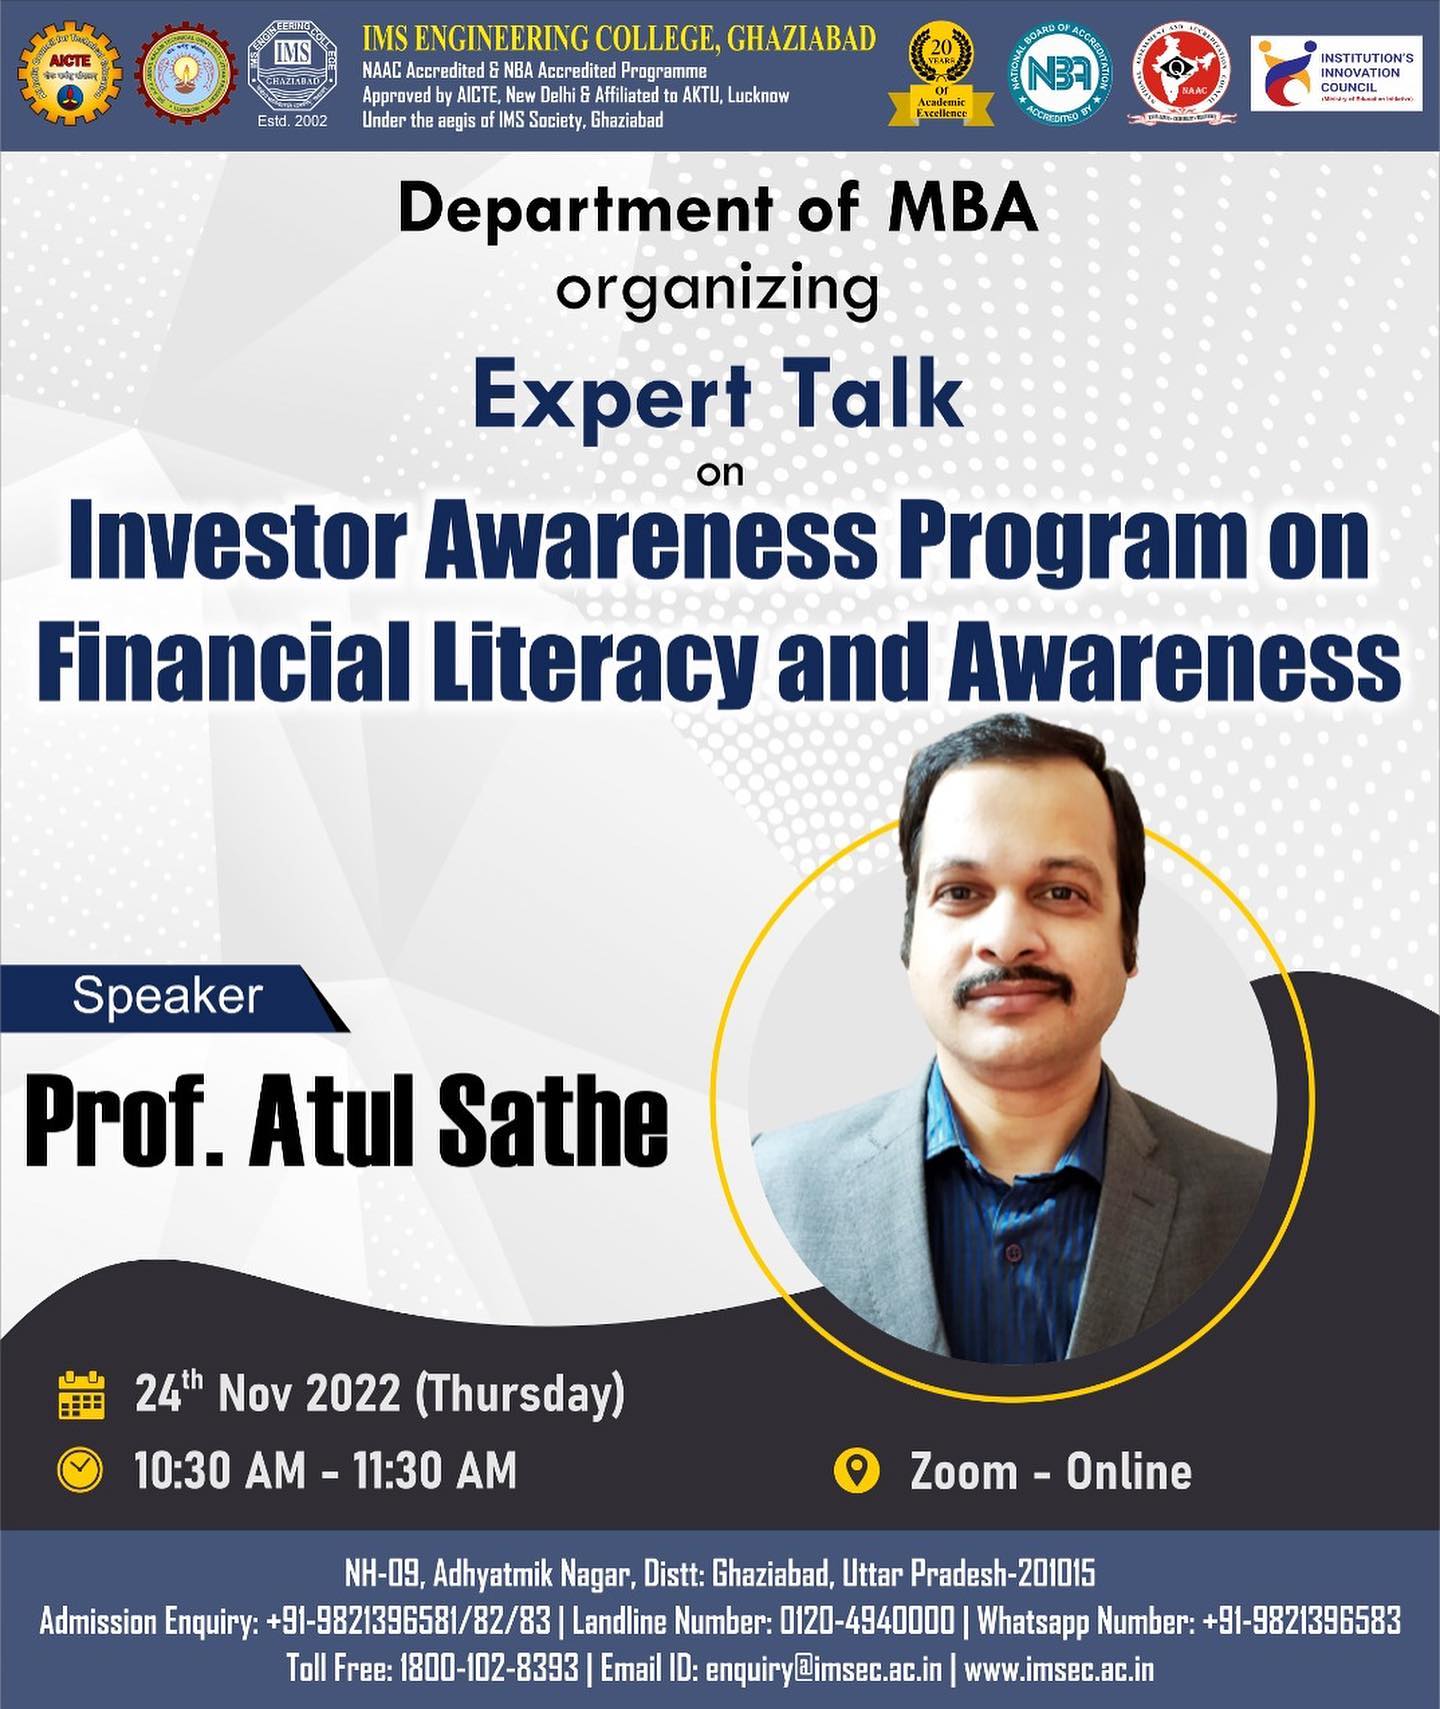 Expert talk on Investor Awareness and Financial Literacy